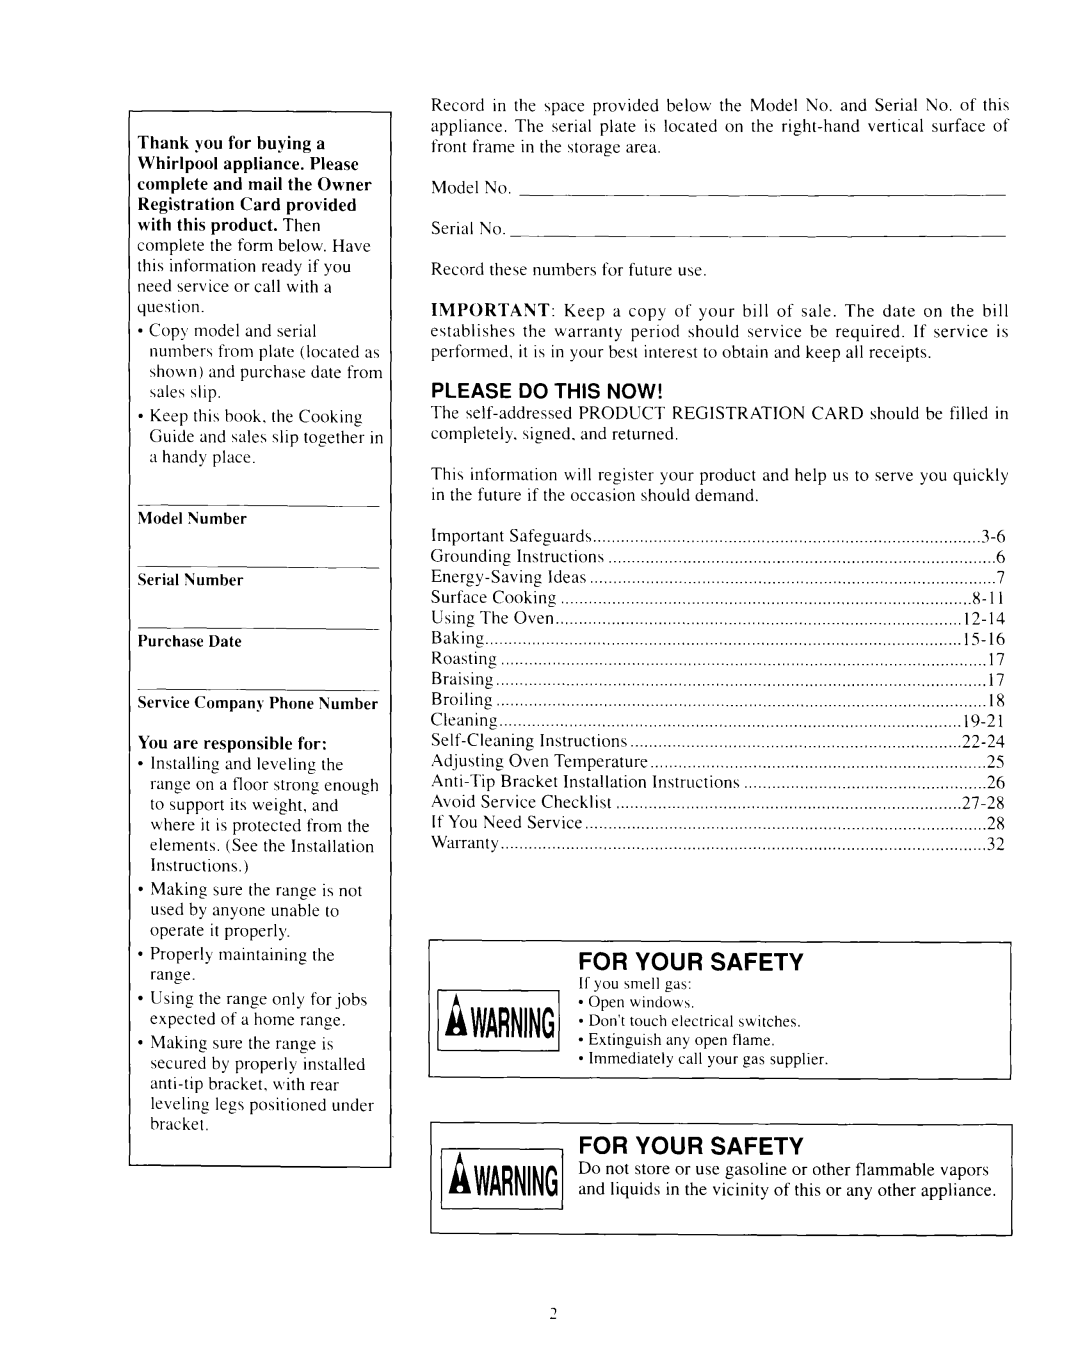 Whirlpool SF365BEXN0 manual For Your Safety, Please Do This Now 